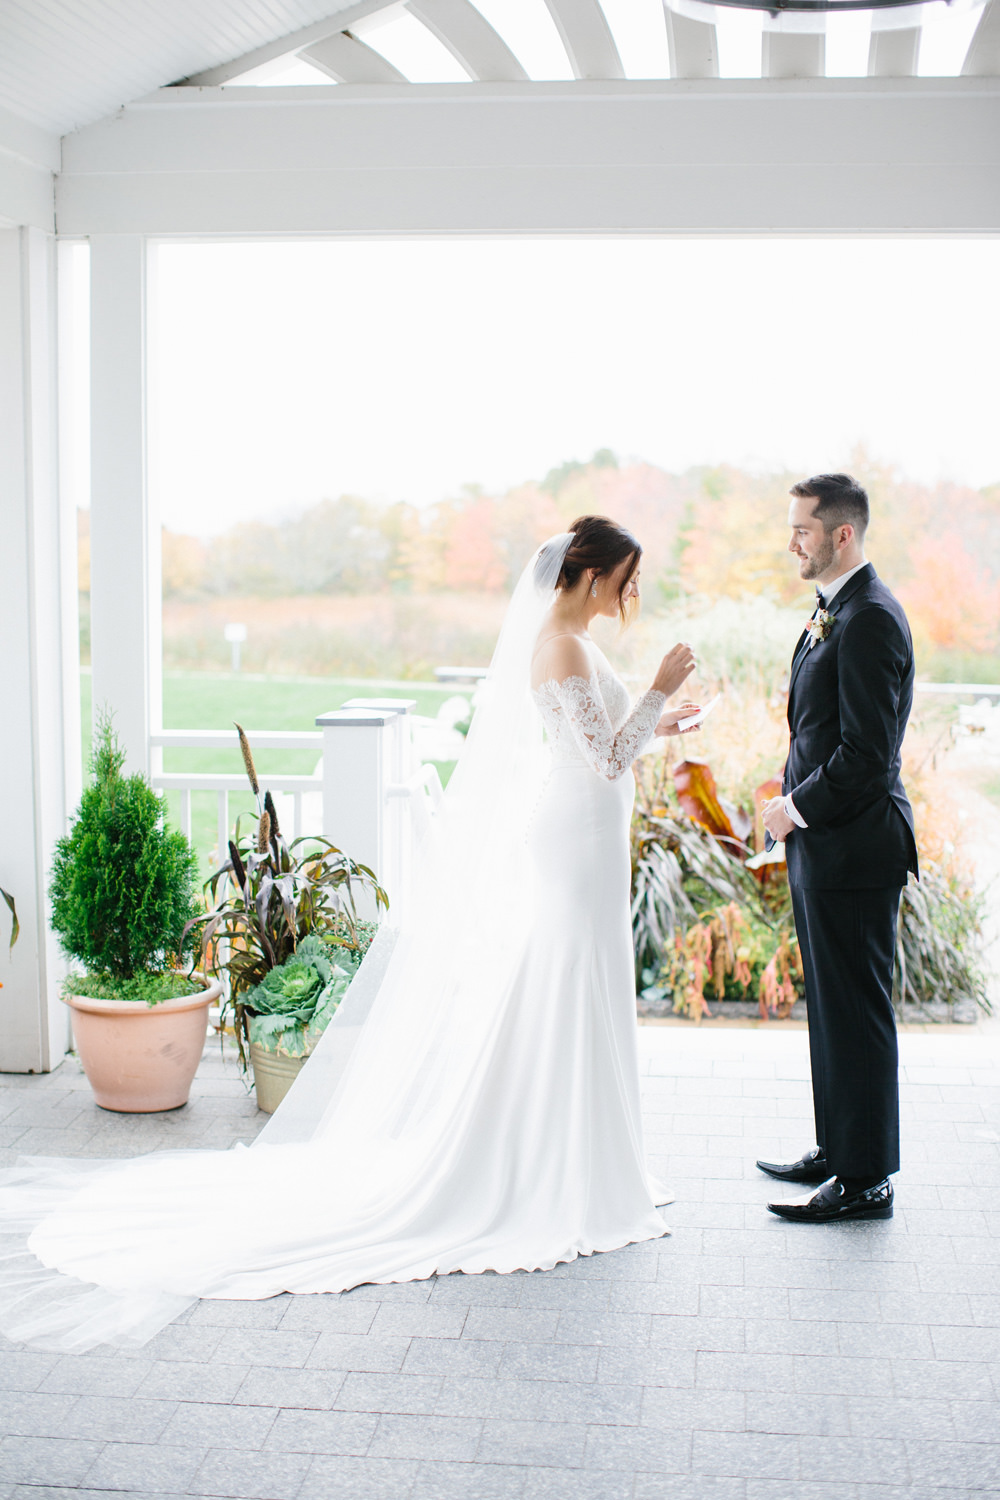 saying wedding vows at Inn by the Sea during Portland Maine elopement | Mary Dougherty